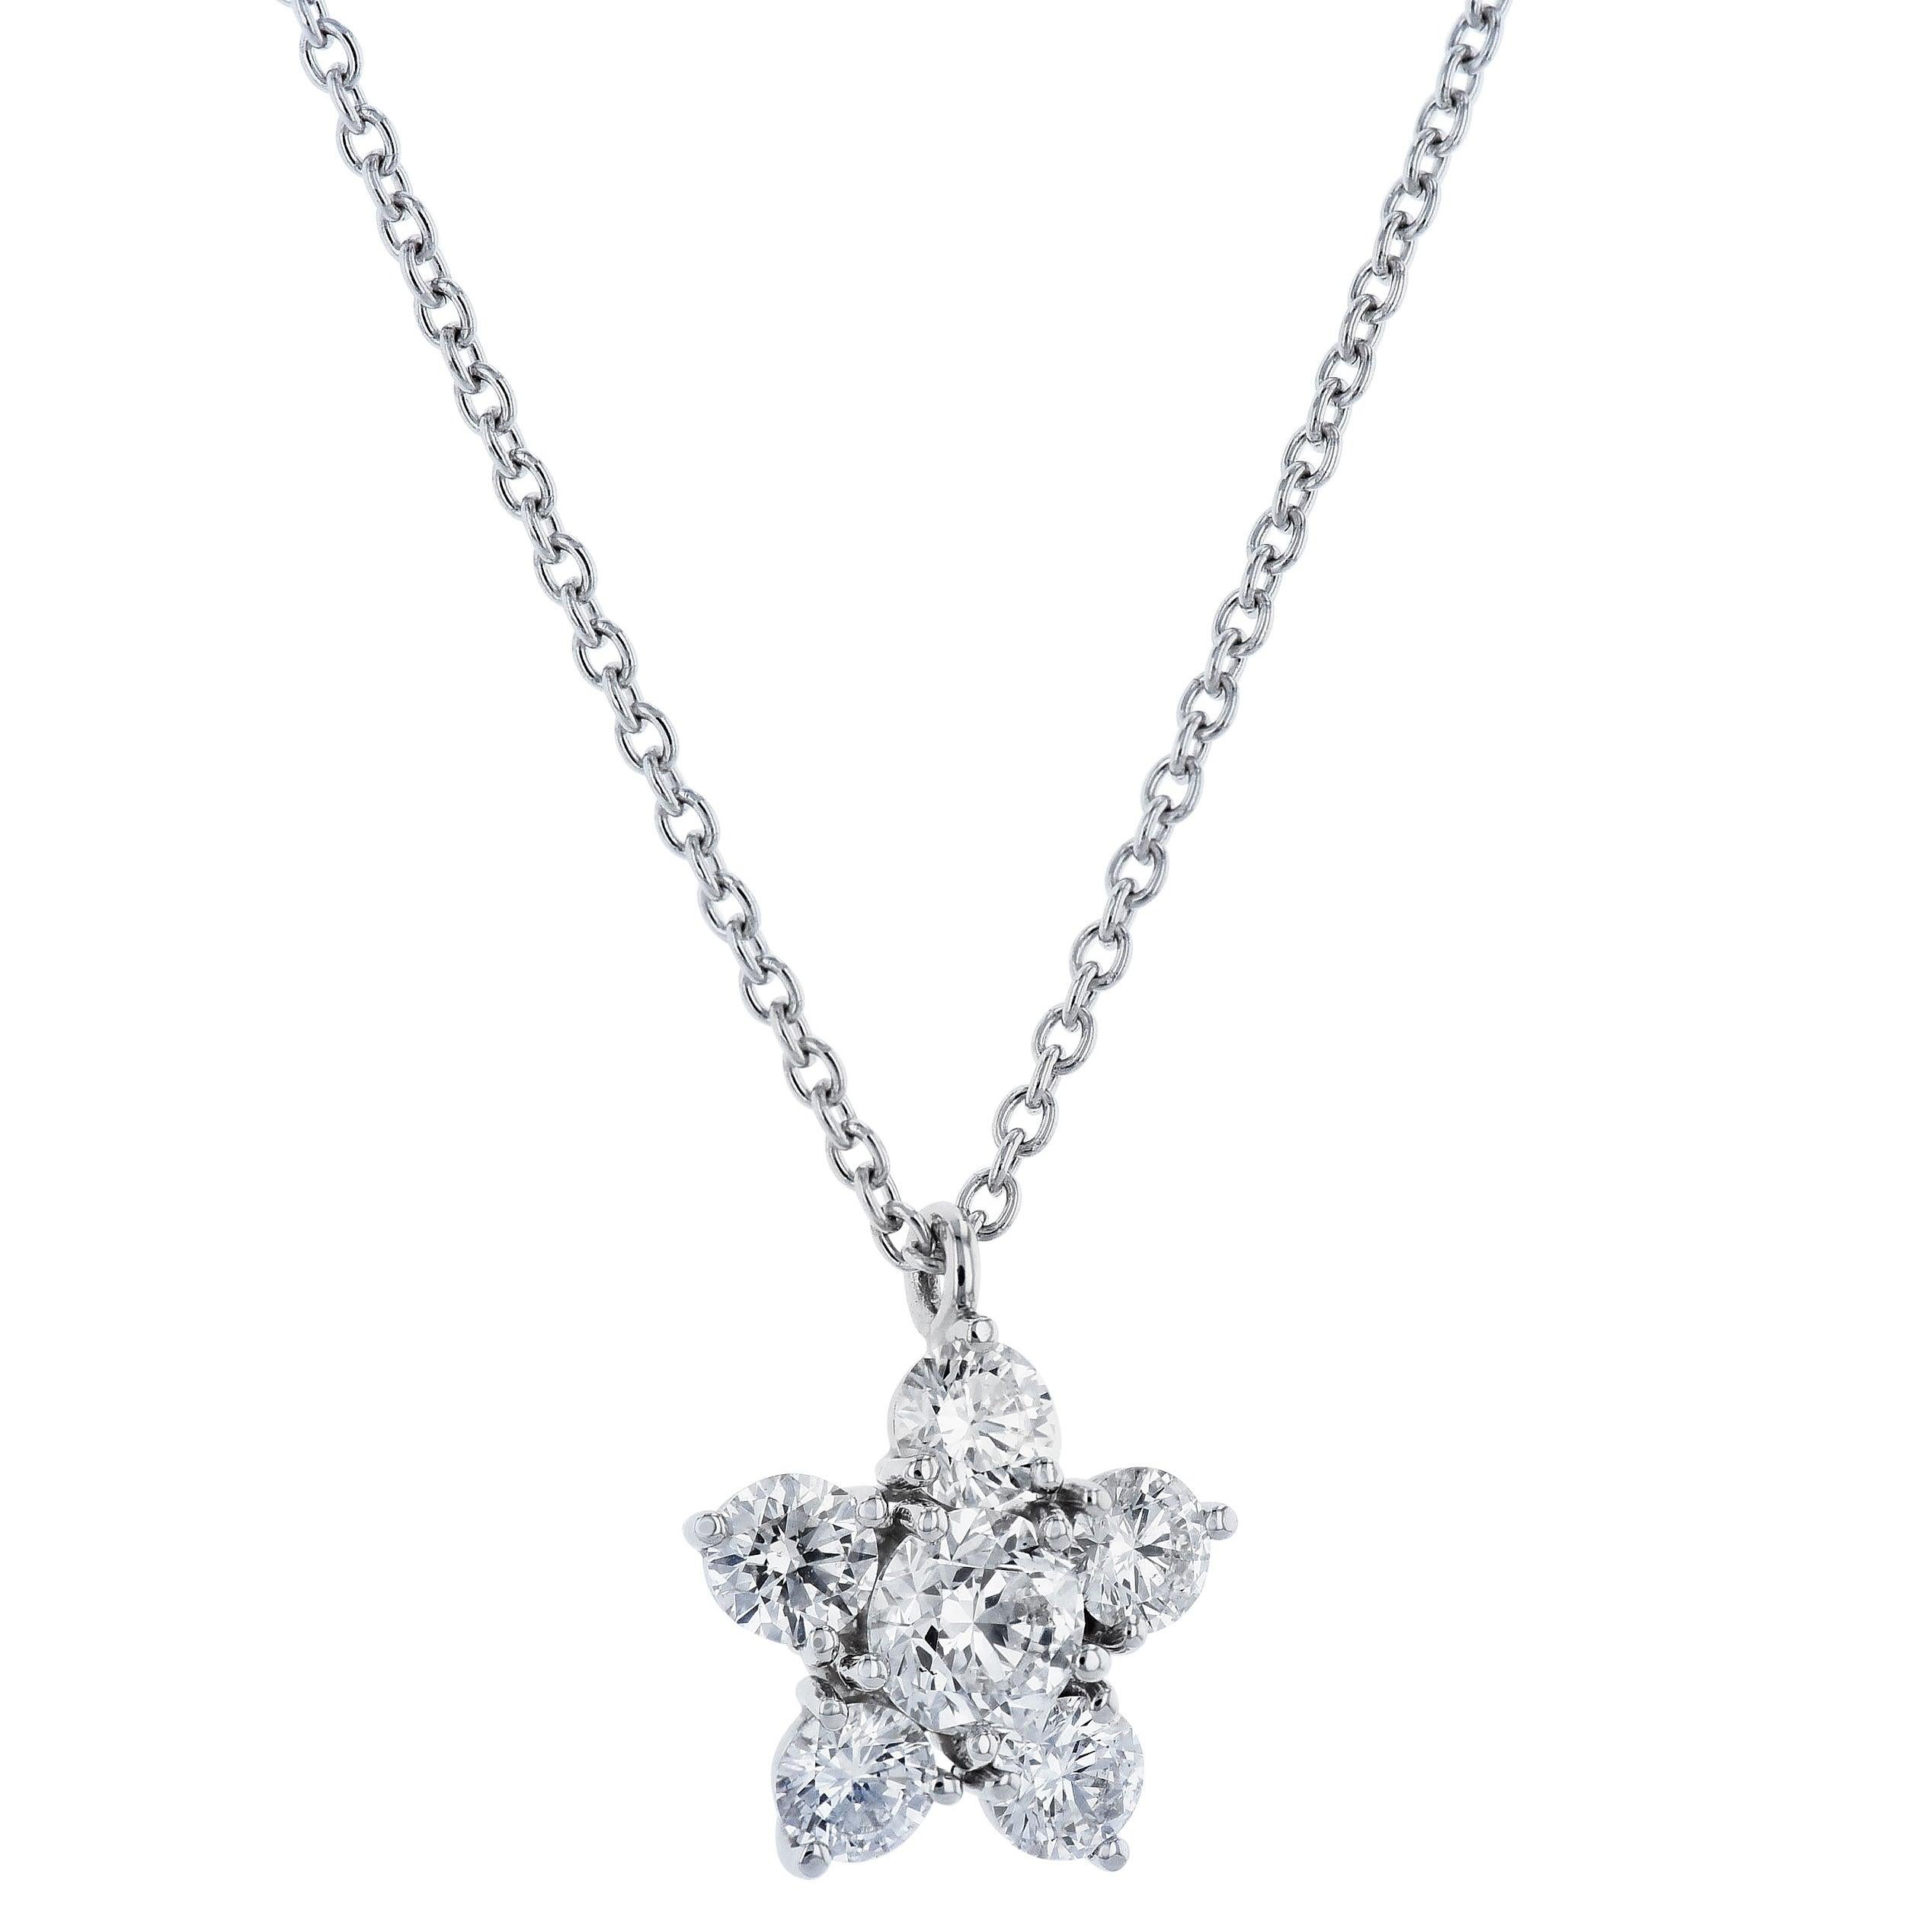 This beautiful handmade Platinum Diamond Flower Pendant has 1.35 carats total weight.
It is suspended by a platinum cable link chain that measures 15